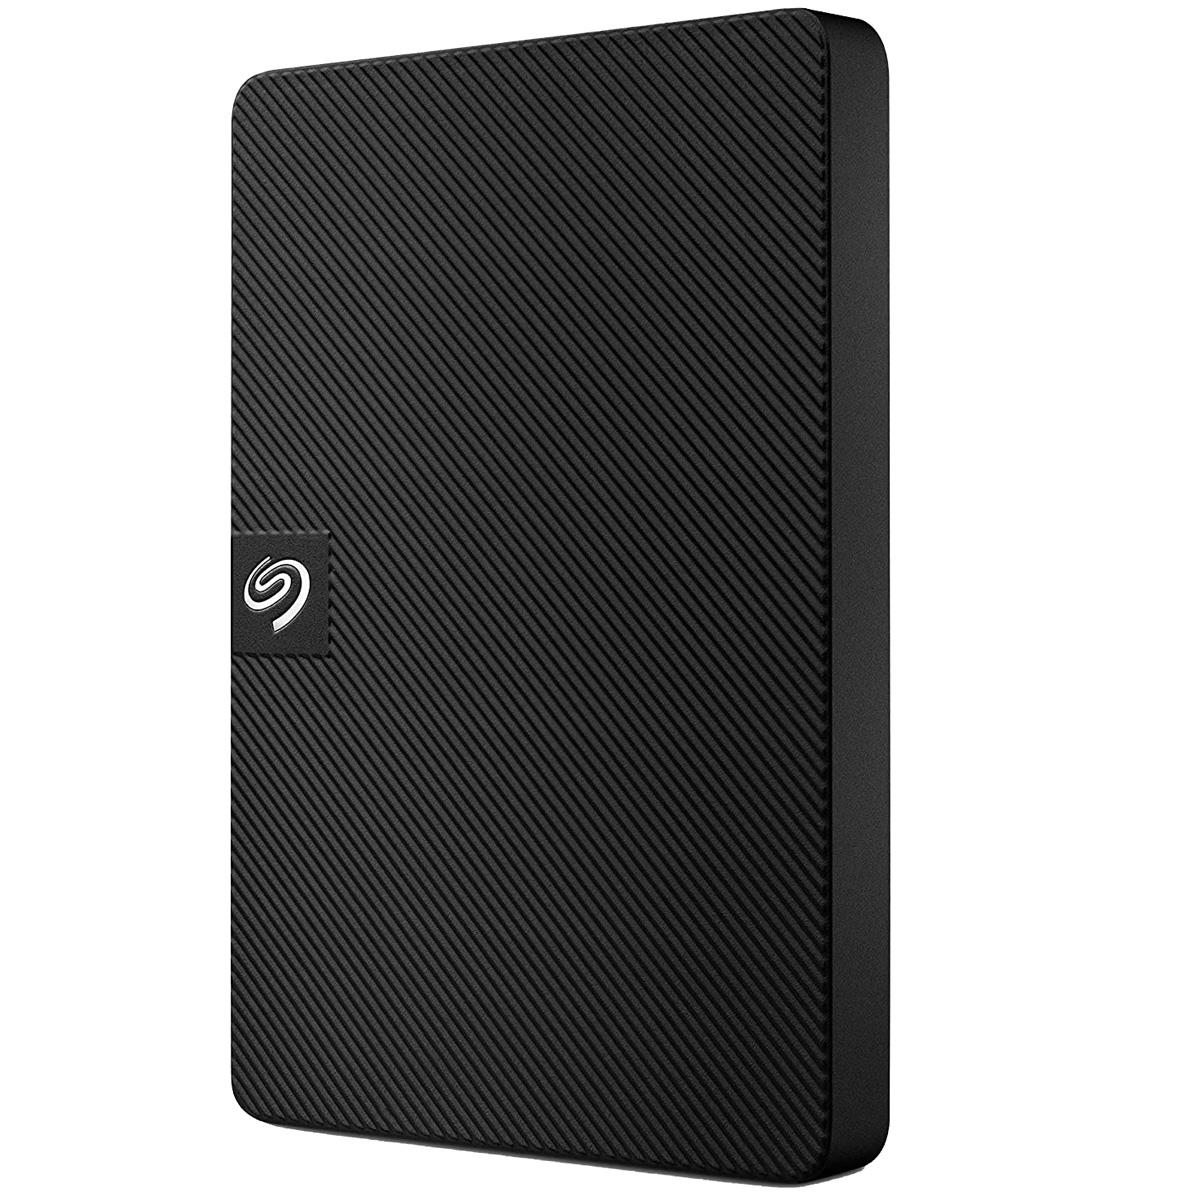 Image of Seagate Expansion 5TB USB 3.0 Portable External Hard Drive